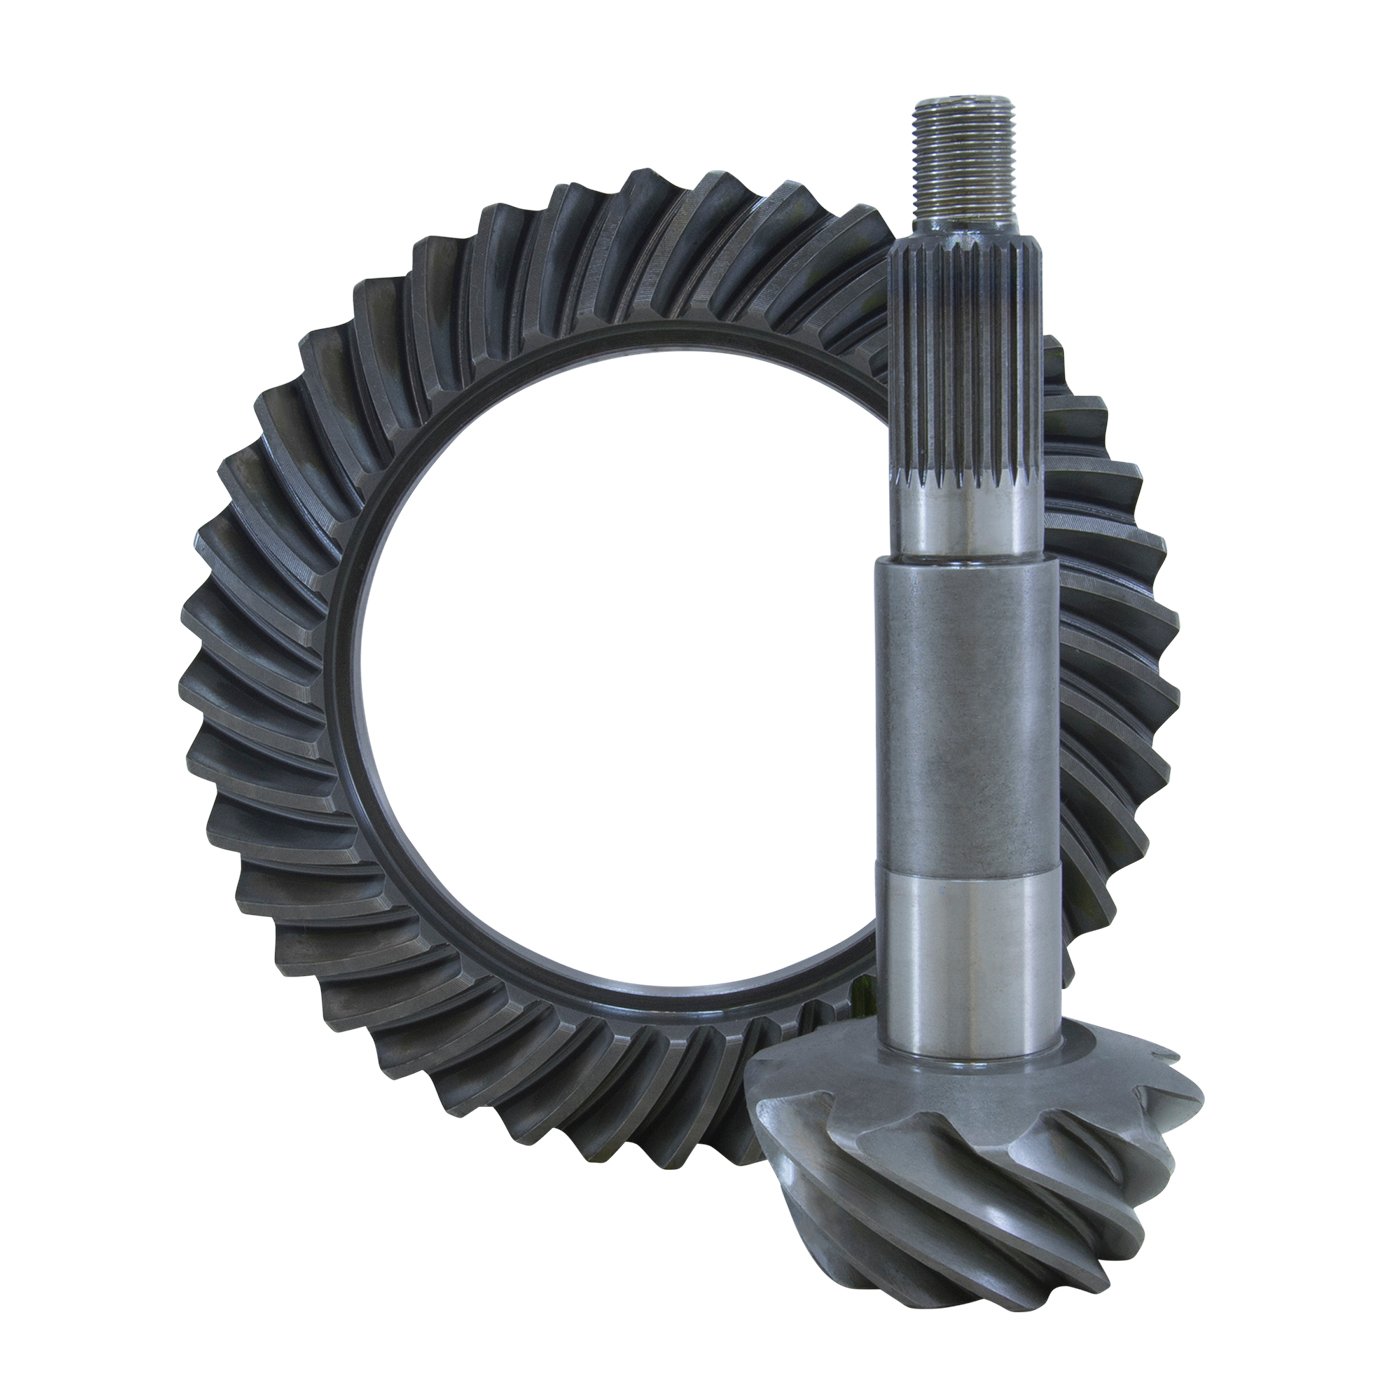 USA Standard ZG D44-354 Ring & Pinion Replacement Gear Set, For Dana 44, 3.54 Ratio